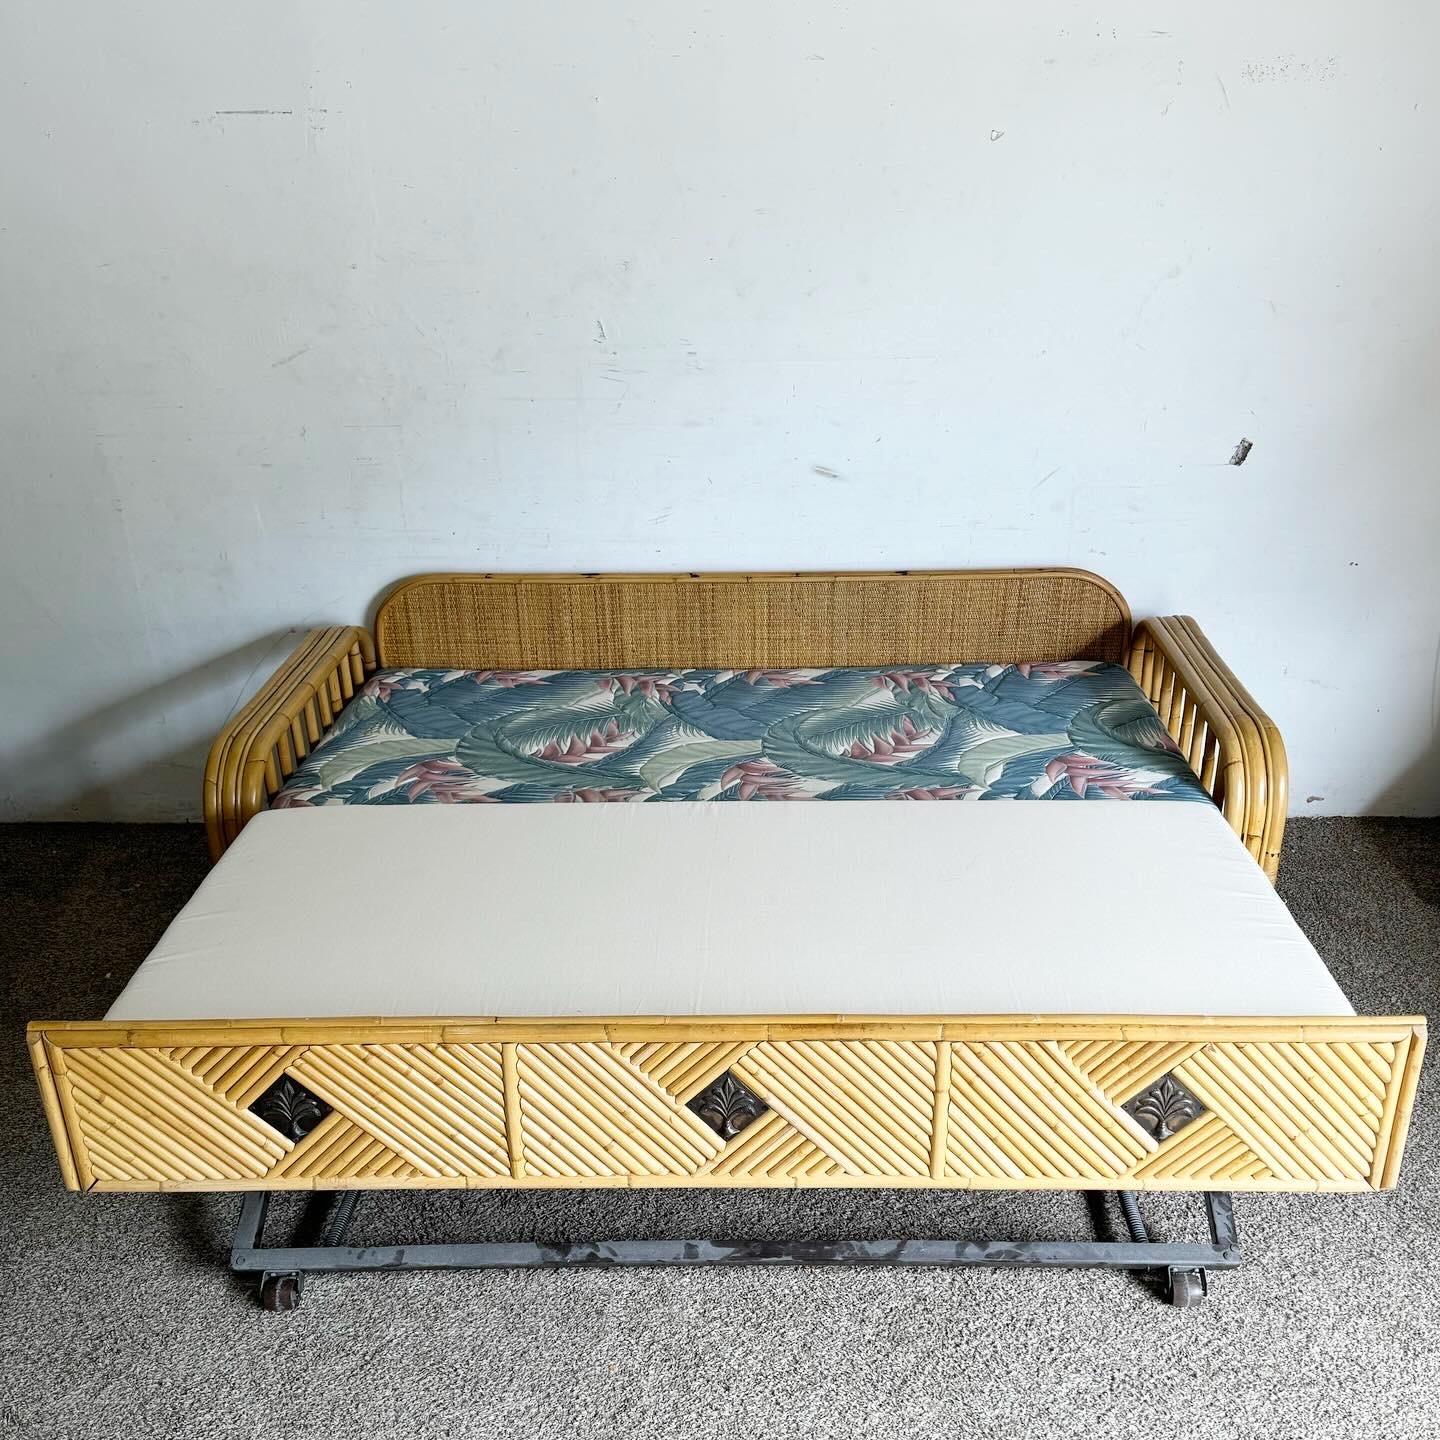 Indonesian Boho Chic Bamboo Rattan Day Bed With Pull Out Trundle For Sale